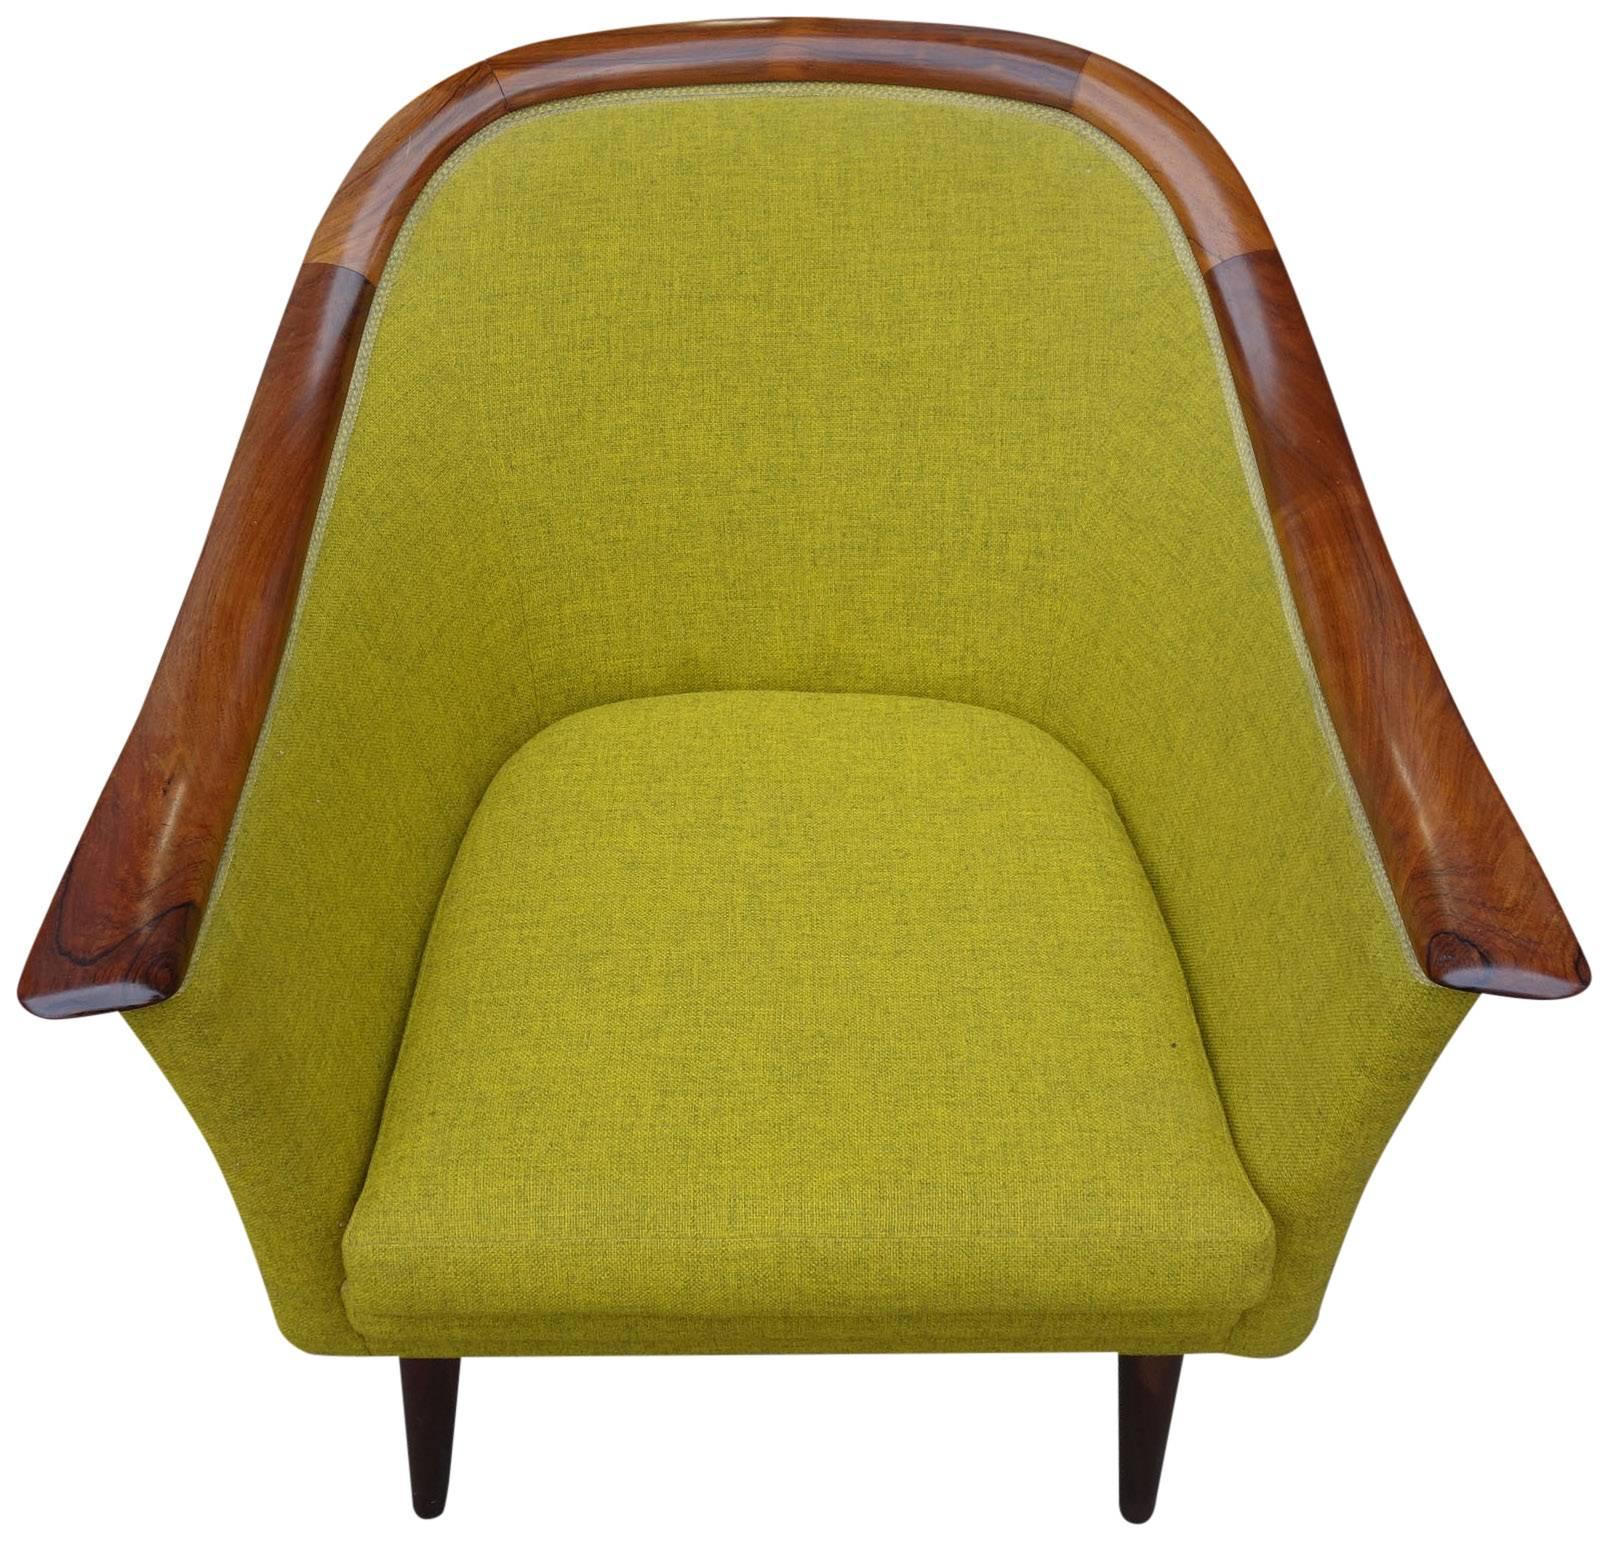 Mid-Century Scandinavian Modern club chair. Beautifully designed and masterfully constructed with rosewood armrest that spans the length of the chair. The upholstery continues around the entire frame. Highest quality that challenges greater known